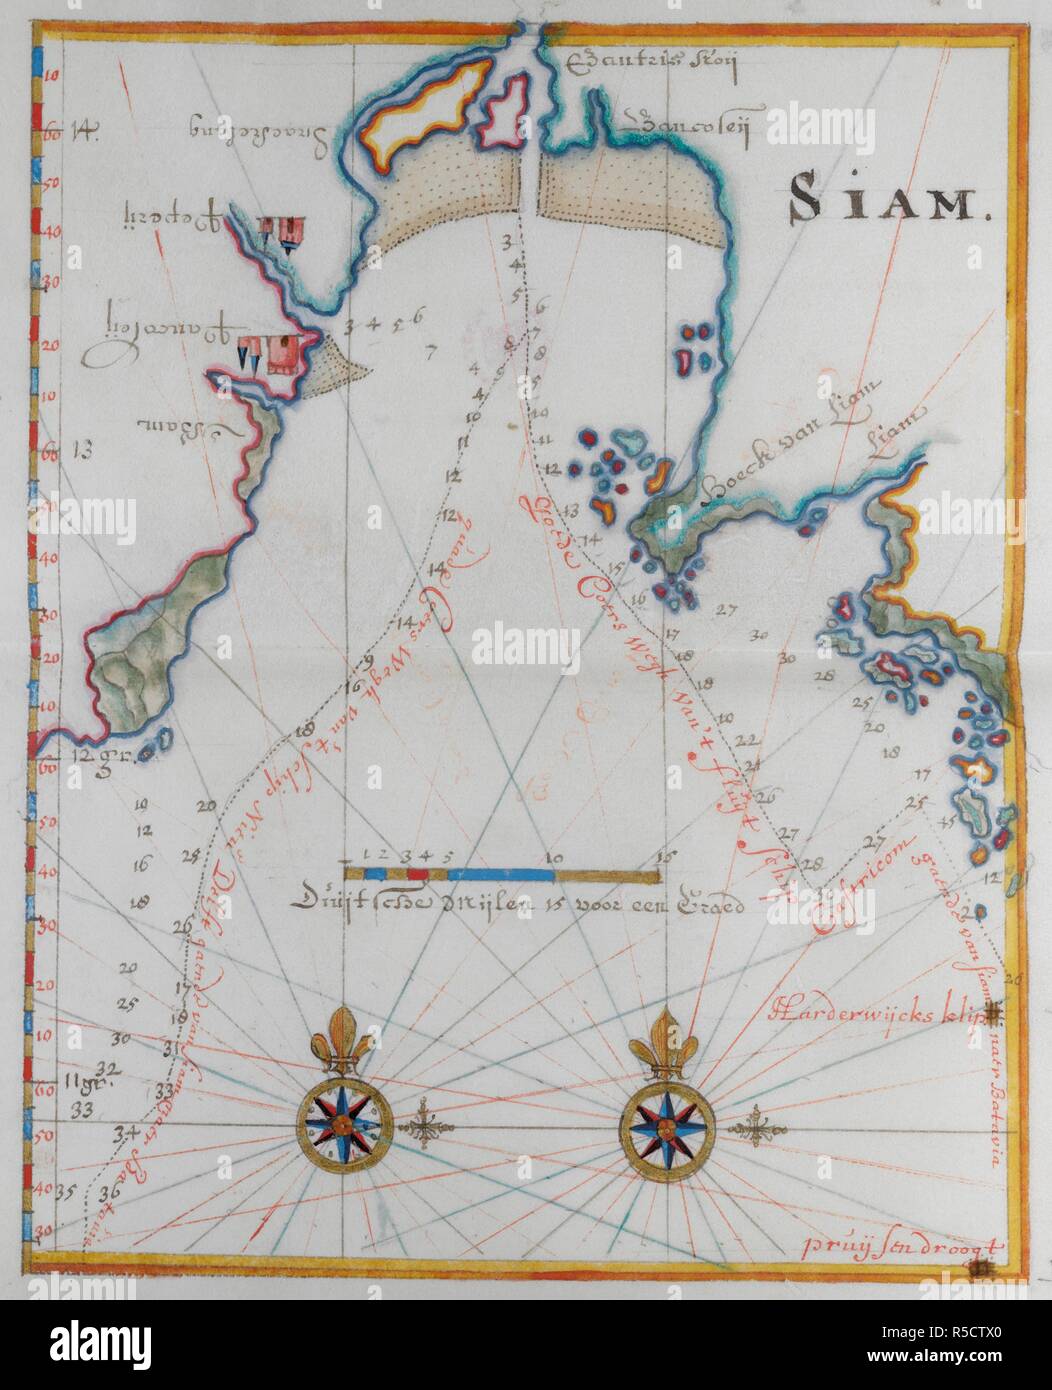 Map of the Kingdom of Siam. DUTCH PORTOLANO, containing forty-nine coloured maps and views. 17th century. Source: Add. 34184, f.38. Stock Photo